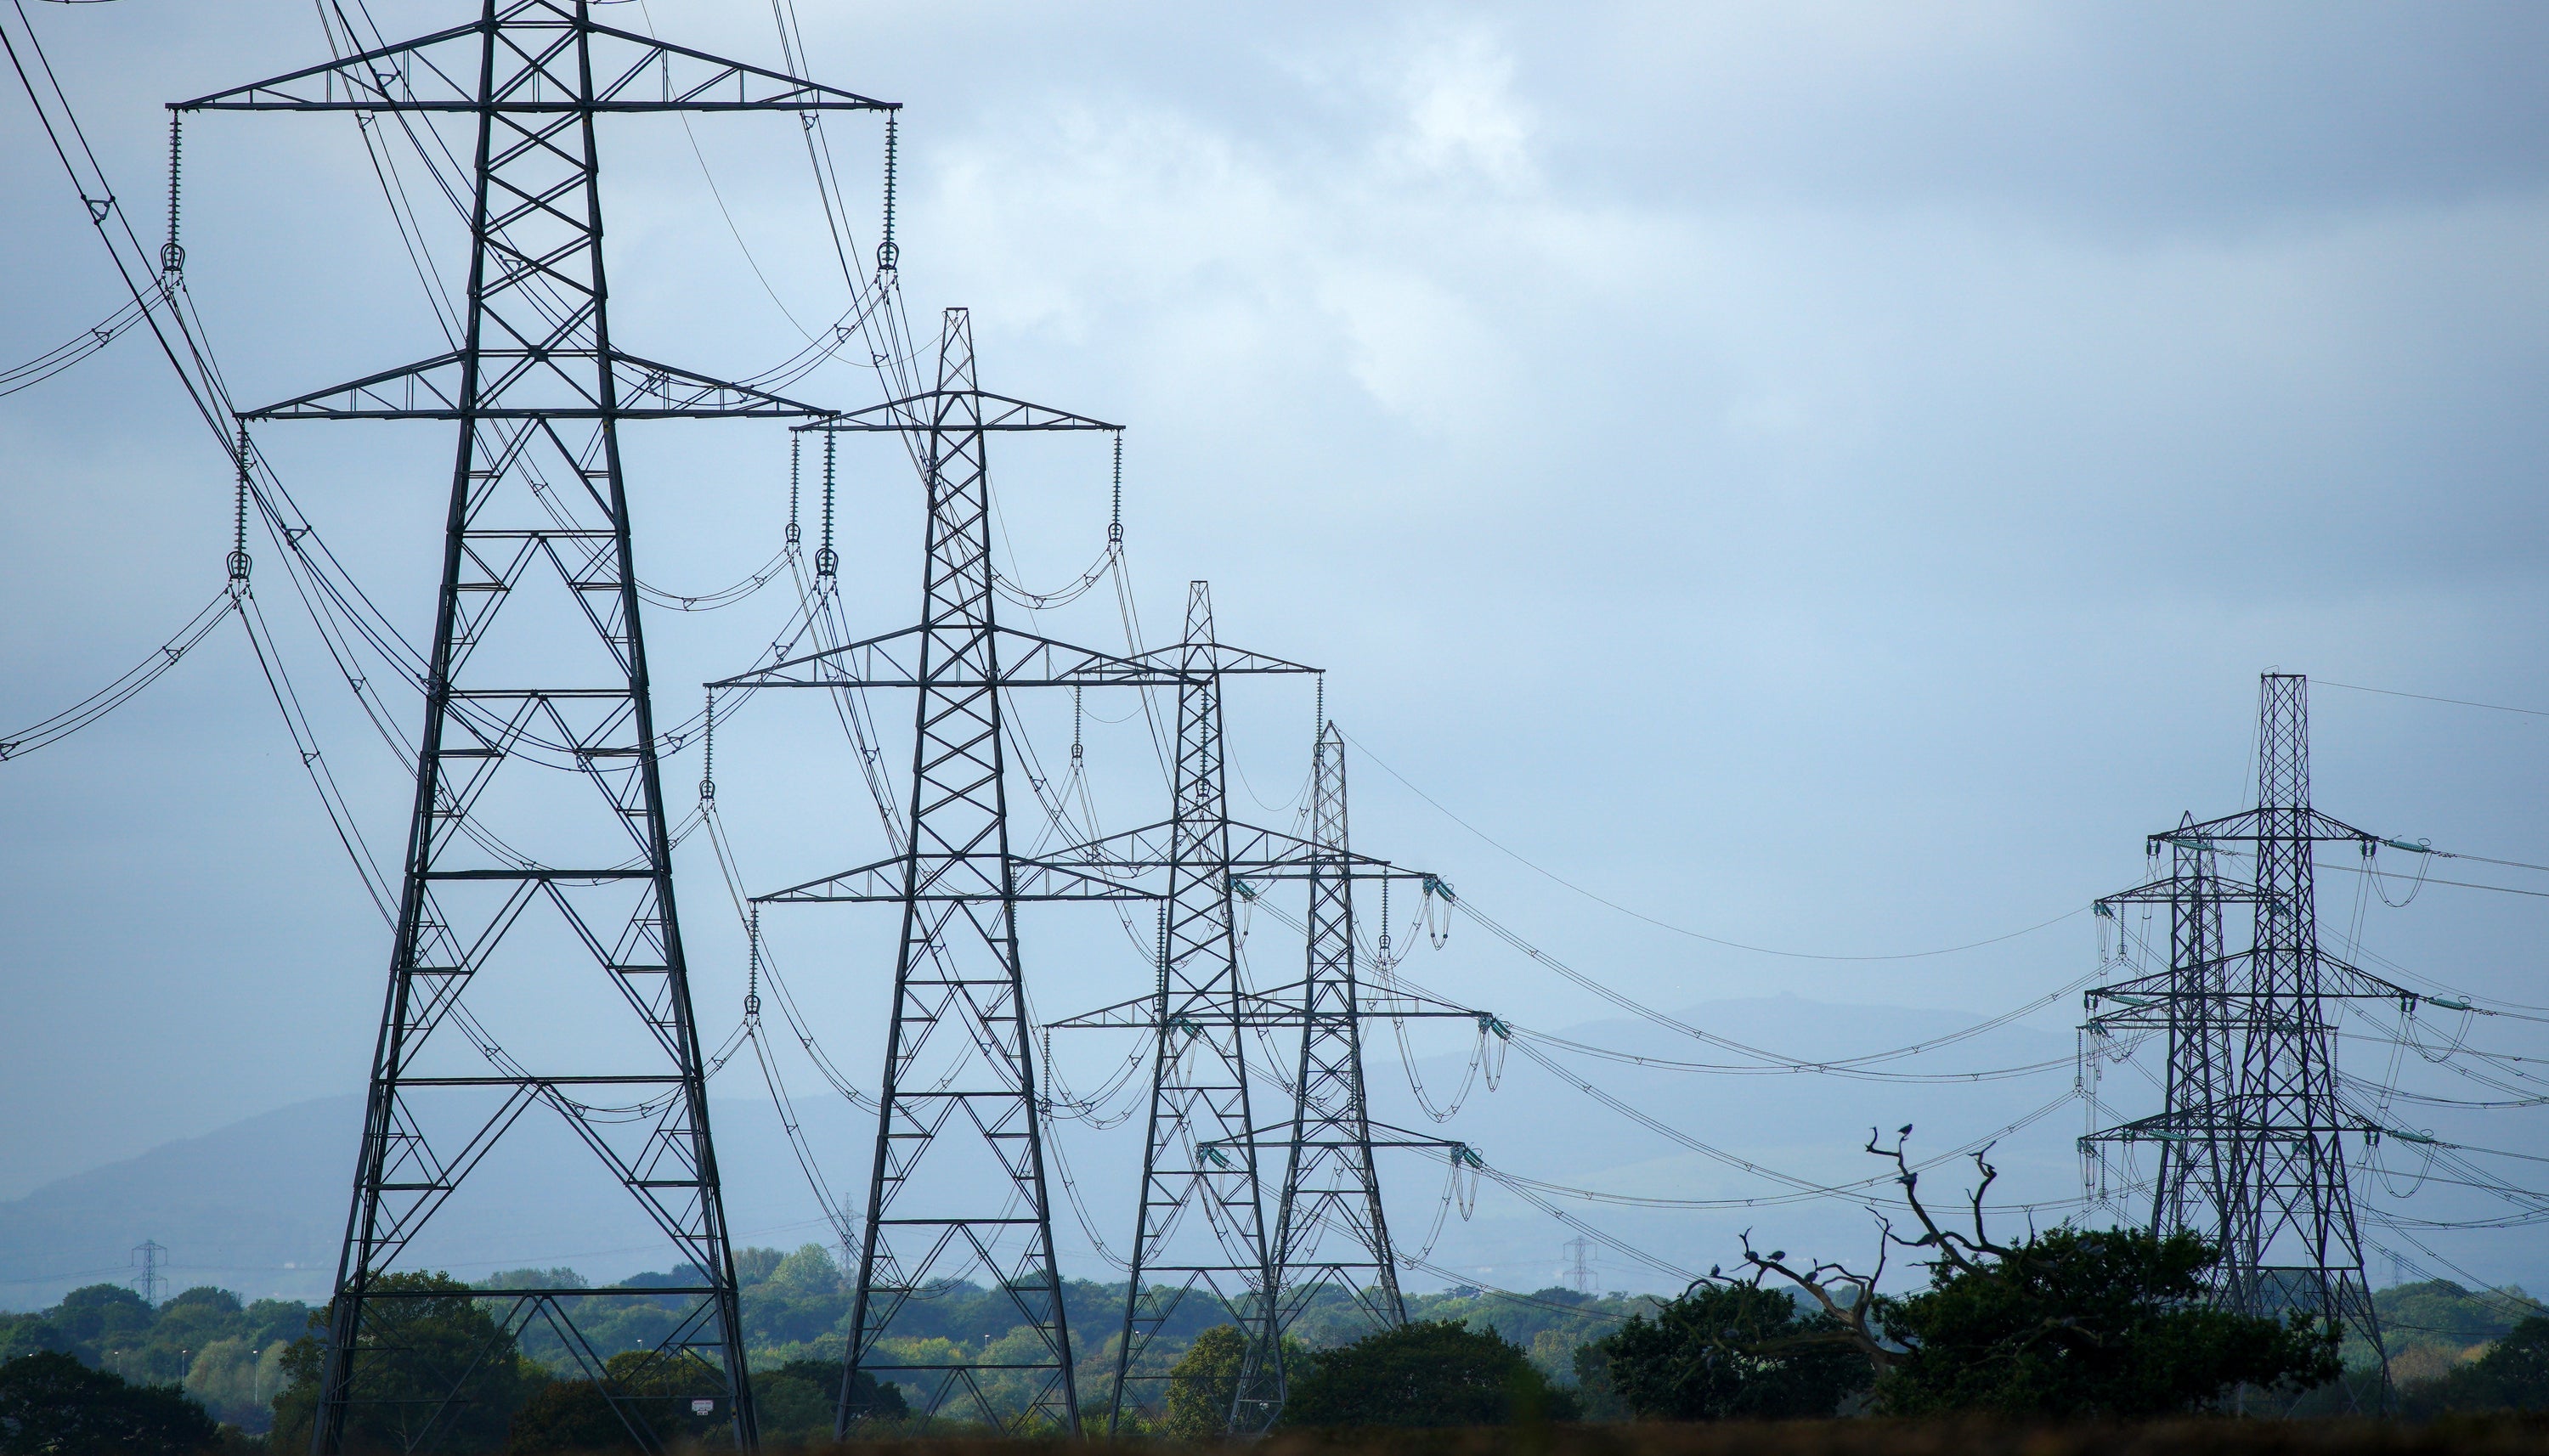 Household bills will not increase as part of plans to spend £21 billion overhauling the UK’s regional electricity networks, the UK energy watchdog has insisted.